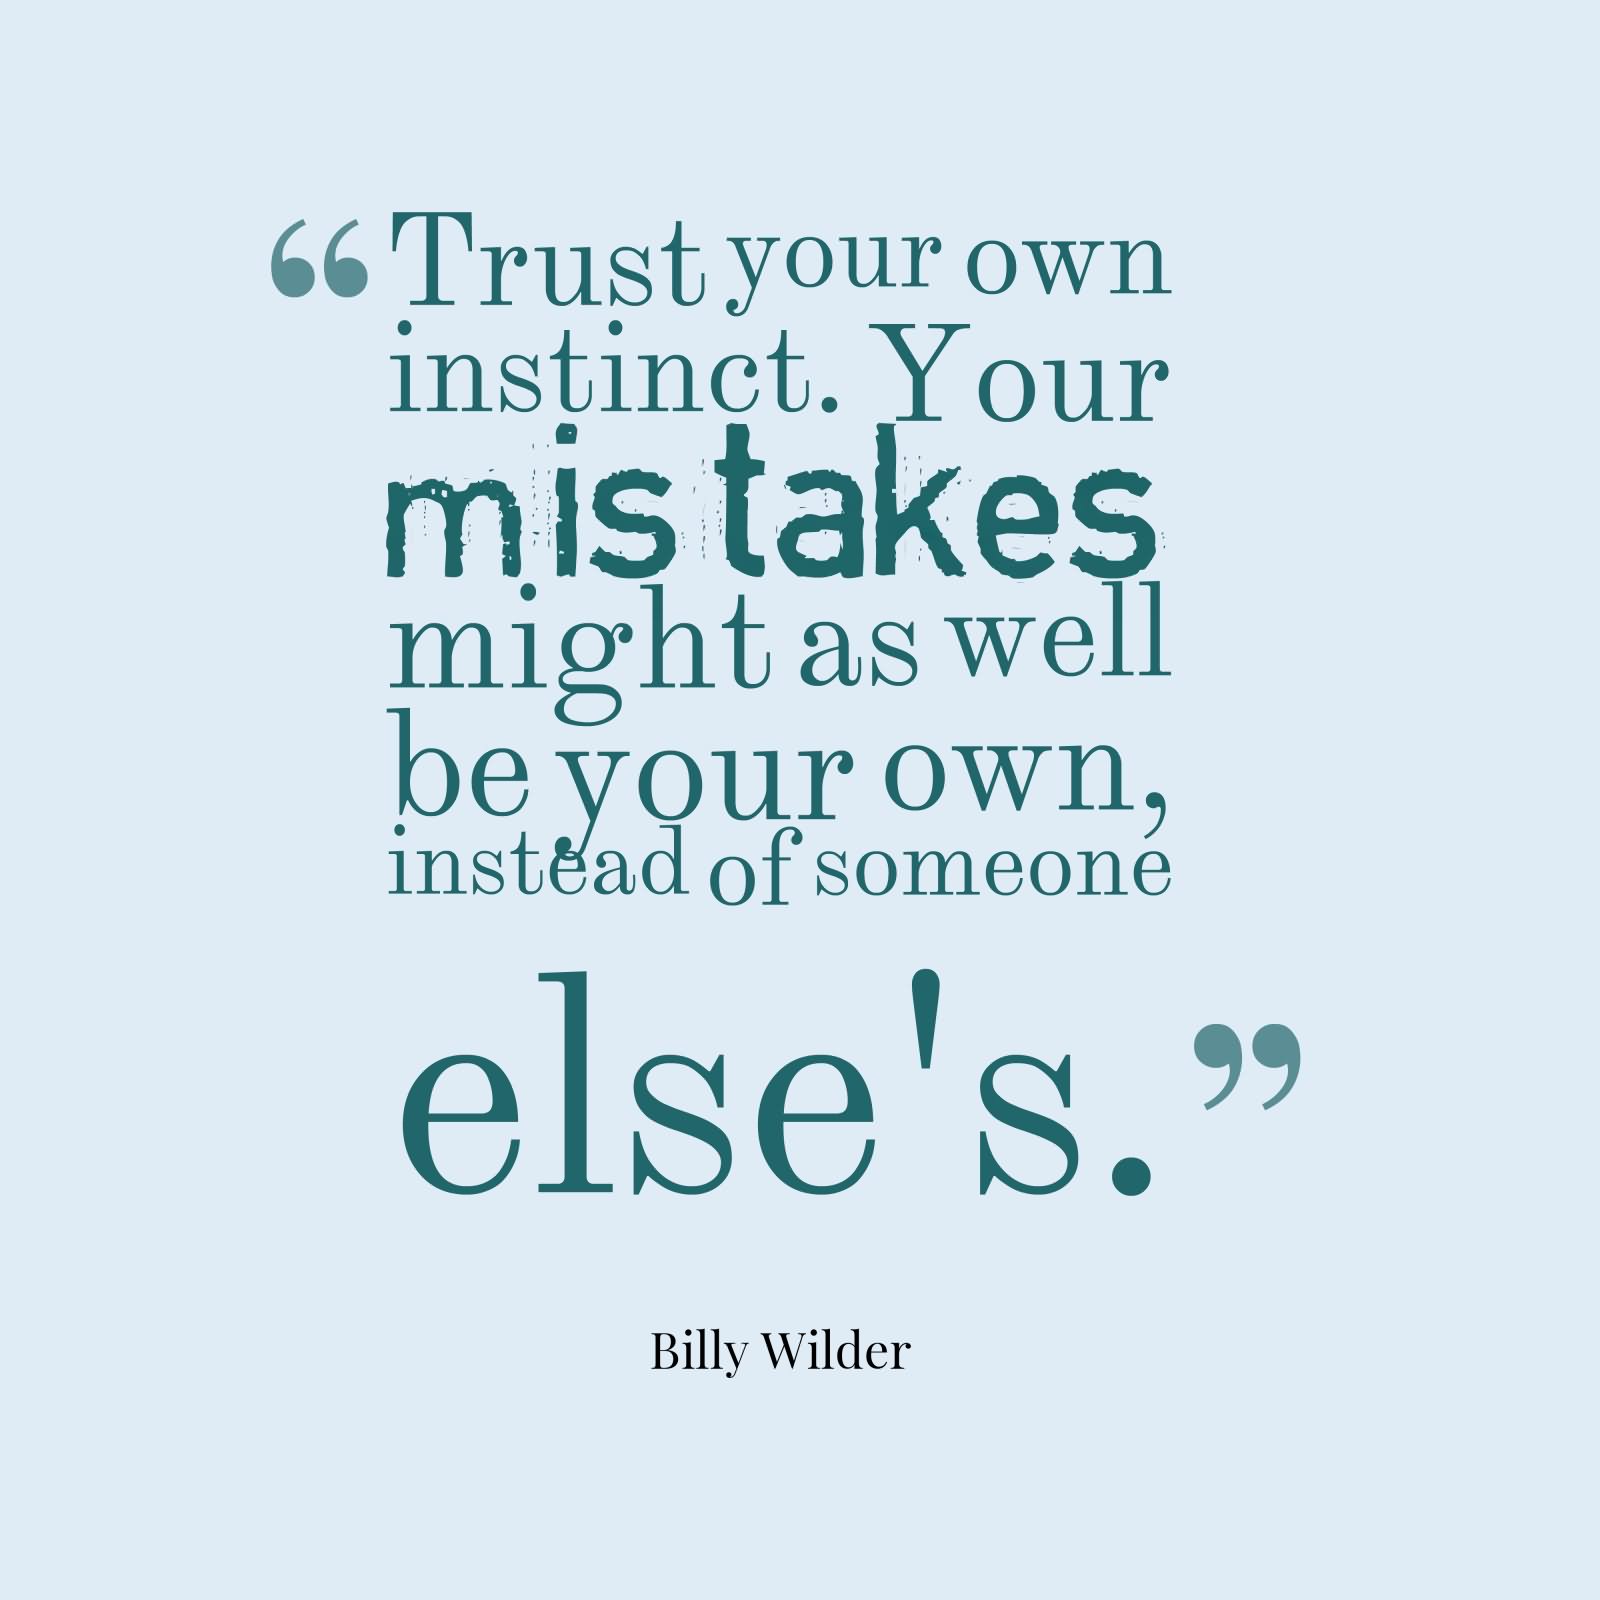 Trust your own instinct. Your mistakes might as well be your own instead of someone else’s. –  Billy Wilder.